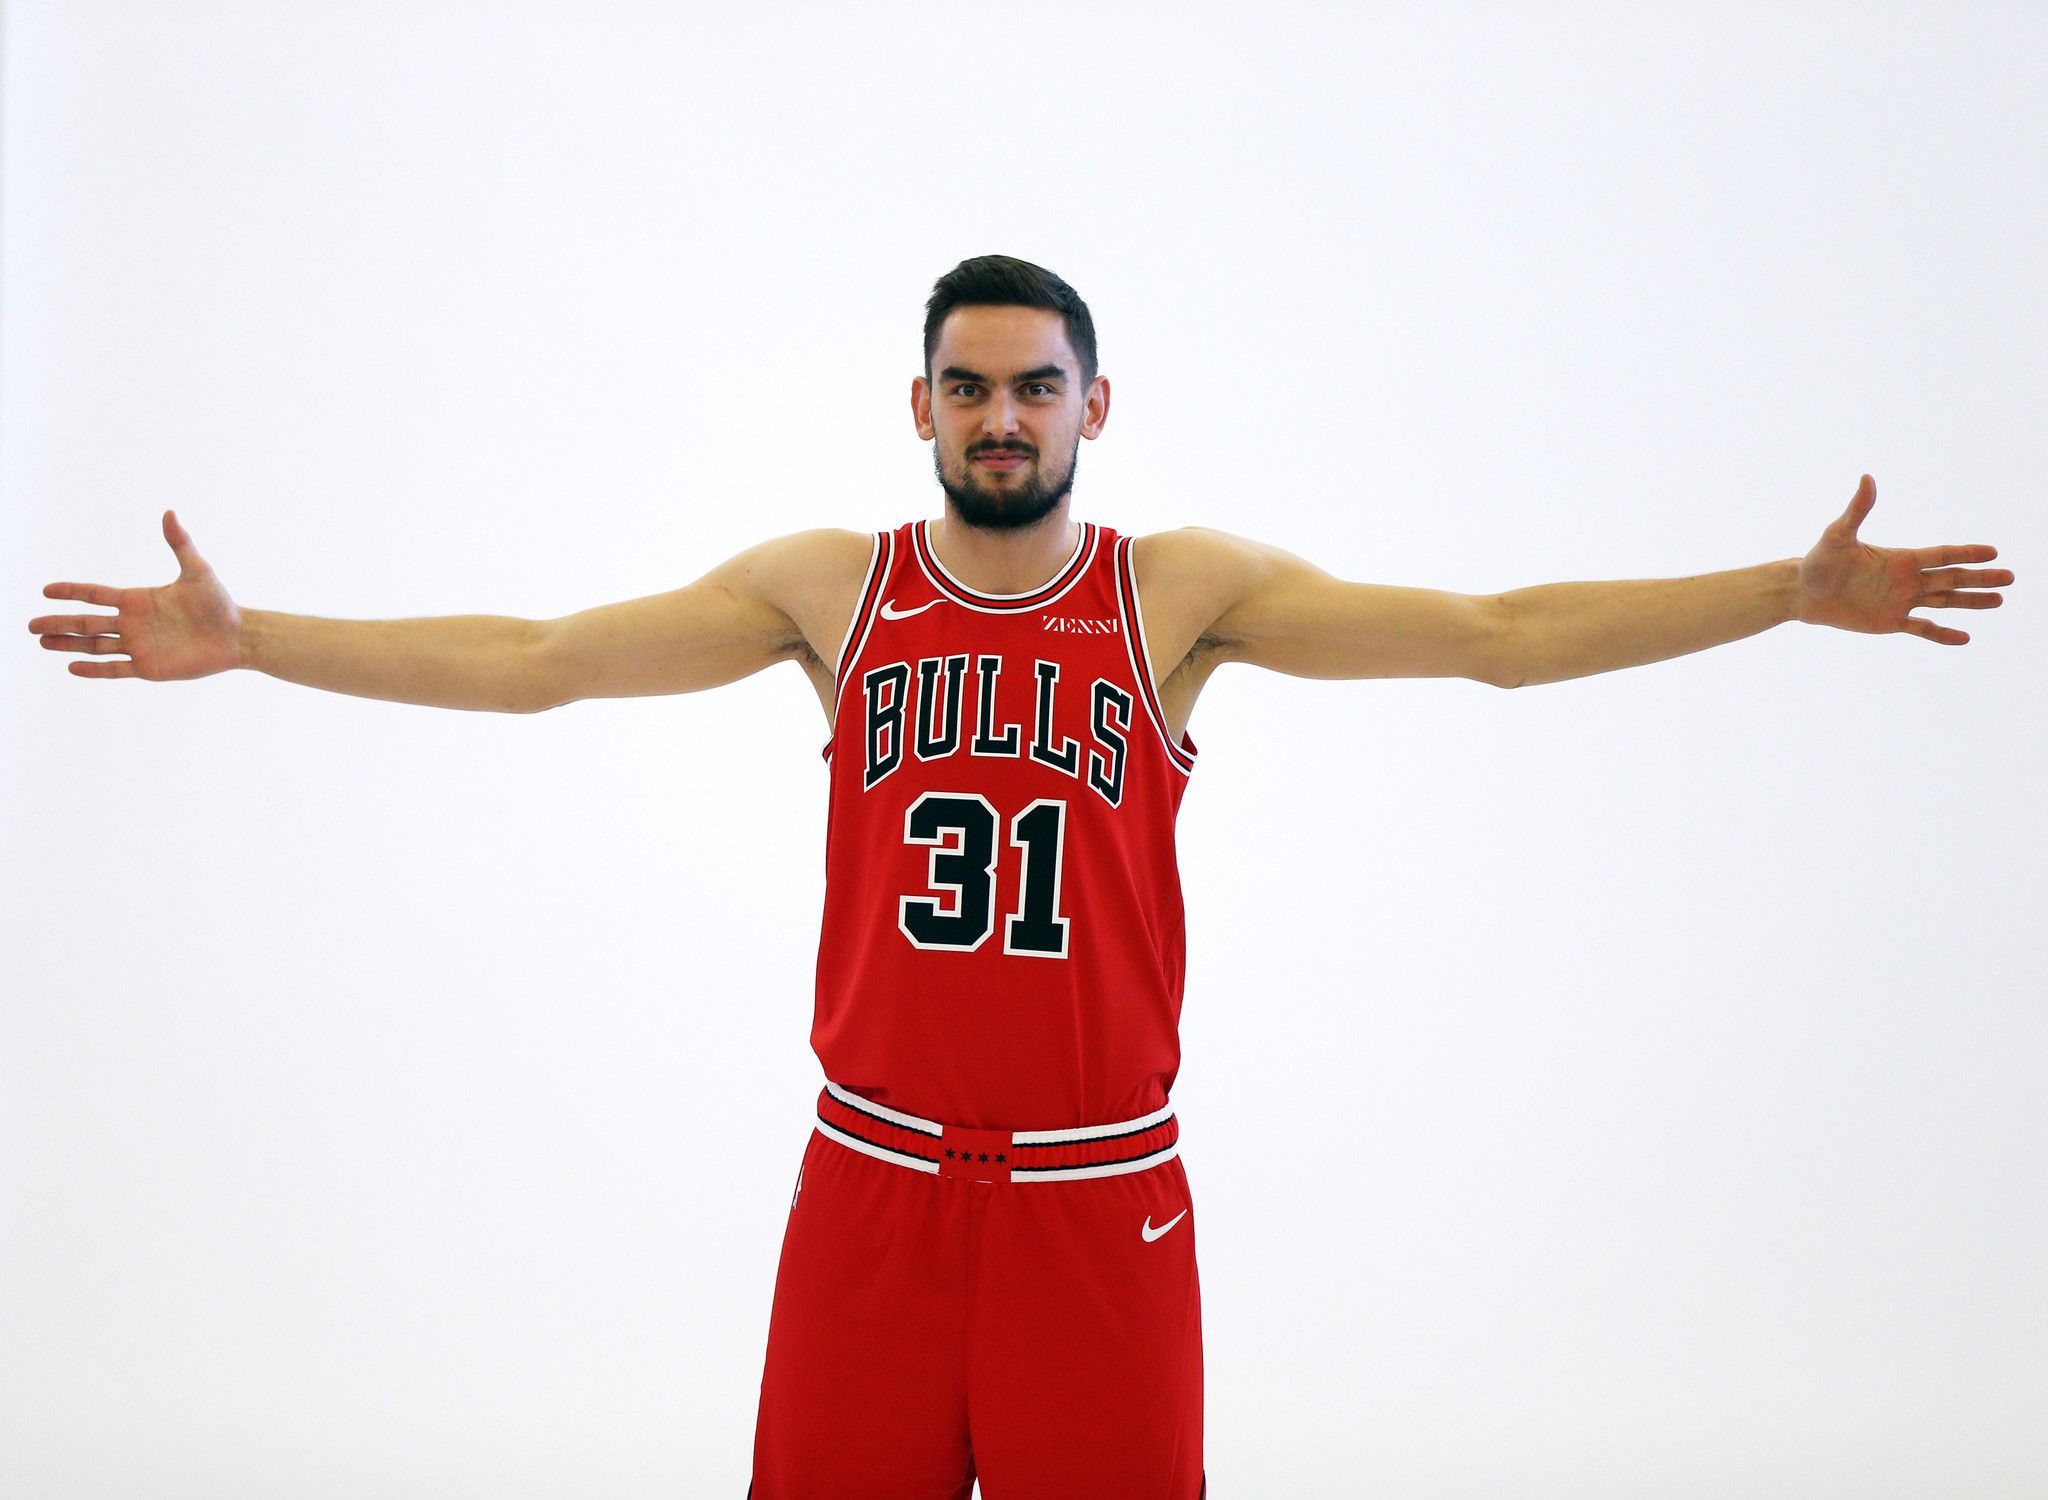 Chicago Bulls: The Bulls surprised Zach LaVine with a sweet zoom call